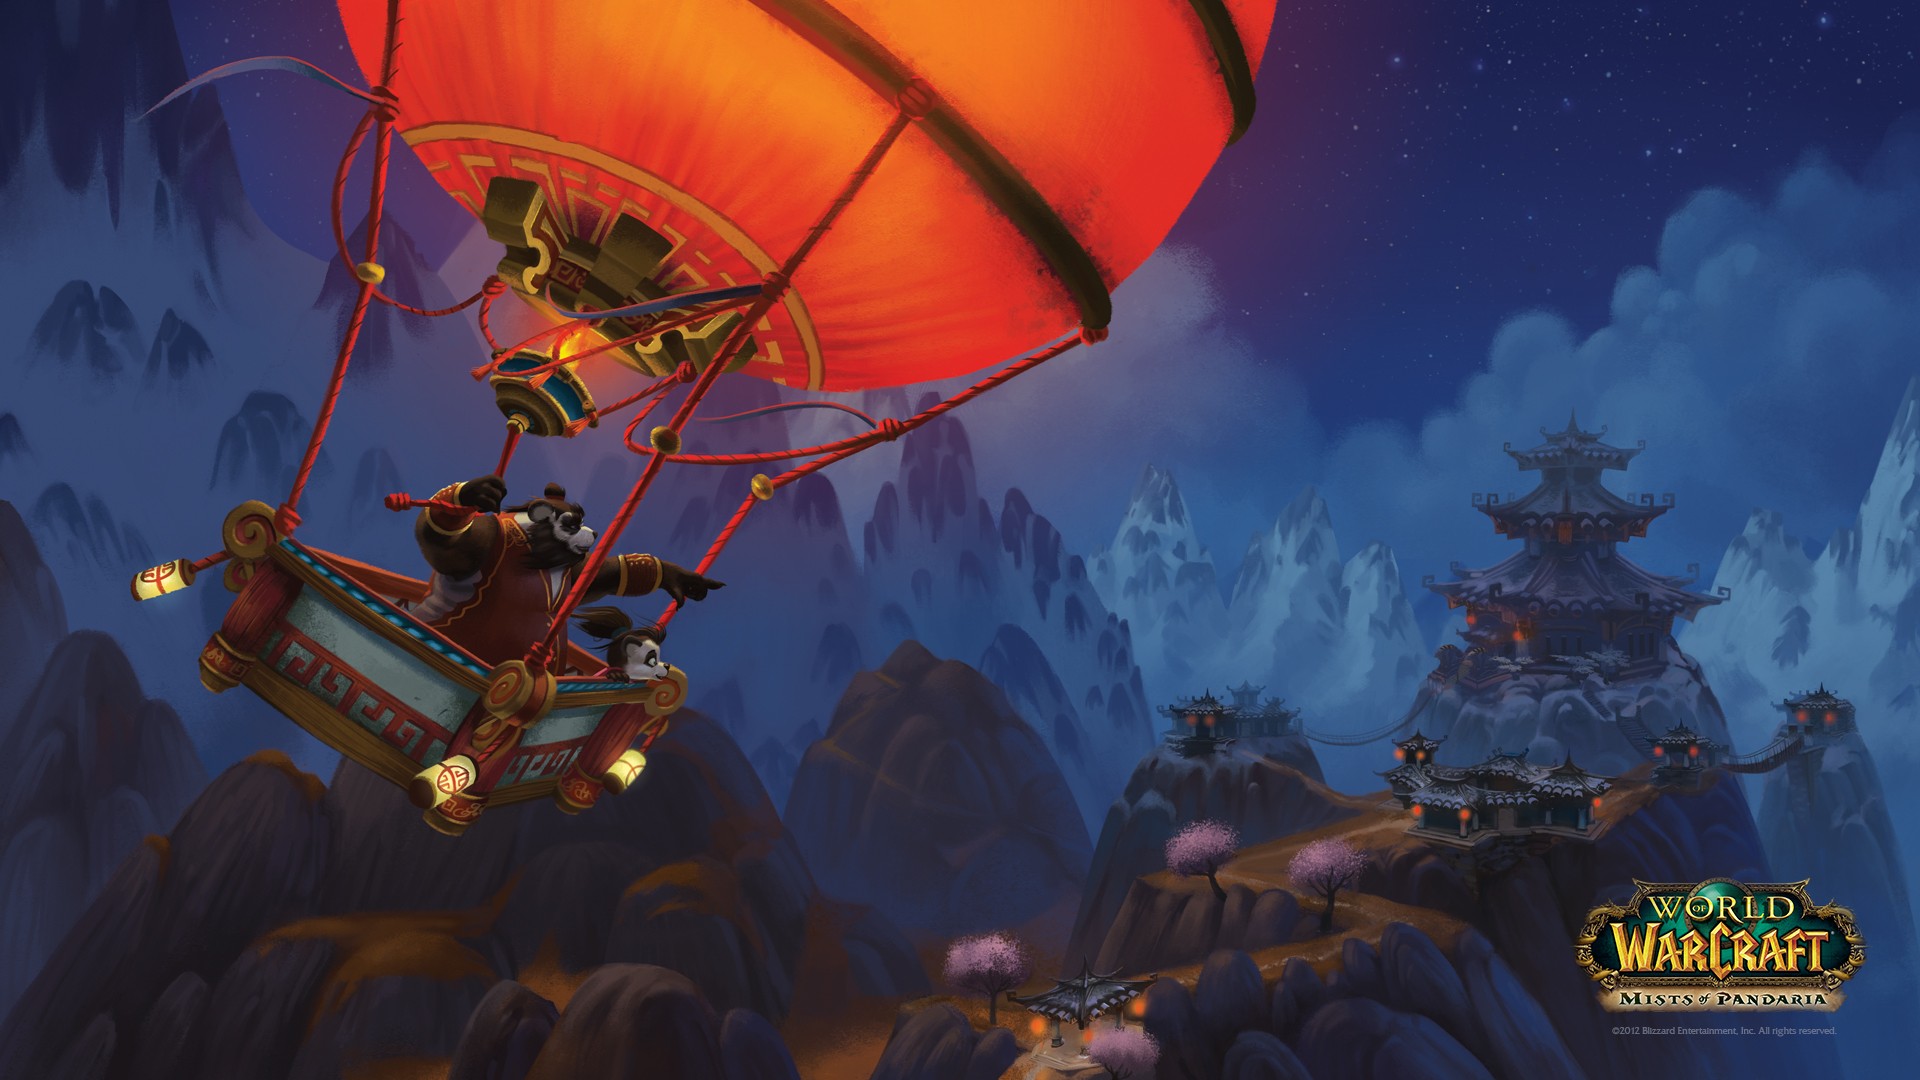 World Of Warcraft PC Gaming Hot Air Balloons World Of Warcraft Mists Of Pandaria Video Games 1920x1080